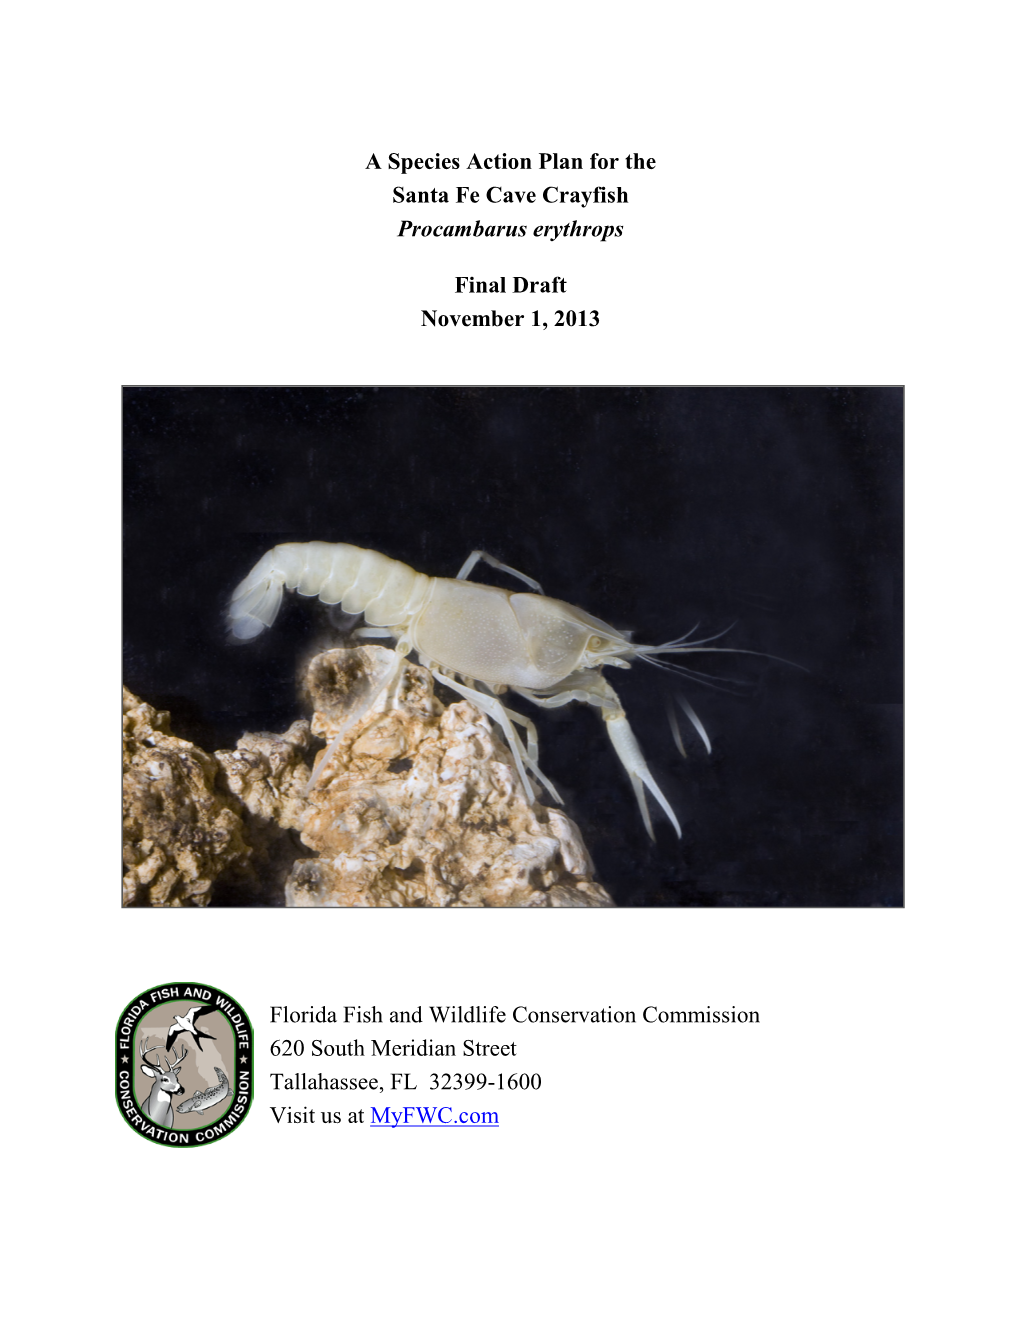 A Species Action Plan for the Santa Fe Cave Crayfish Procambarus Erythrops